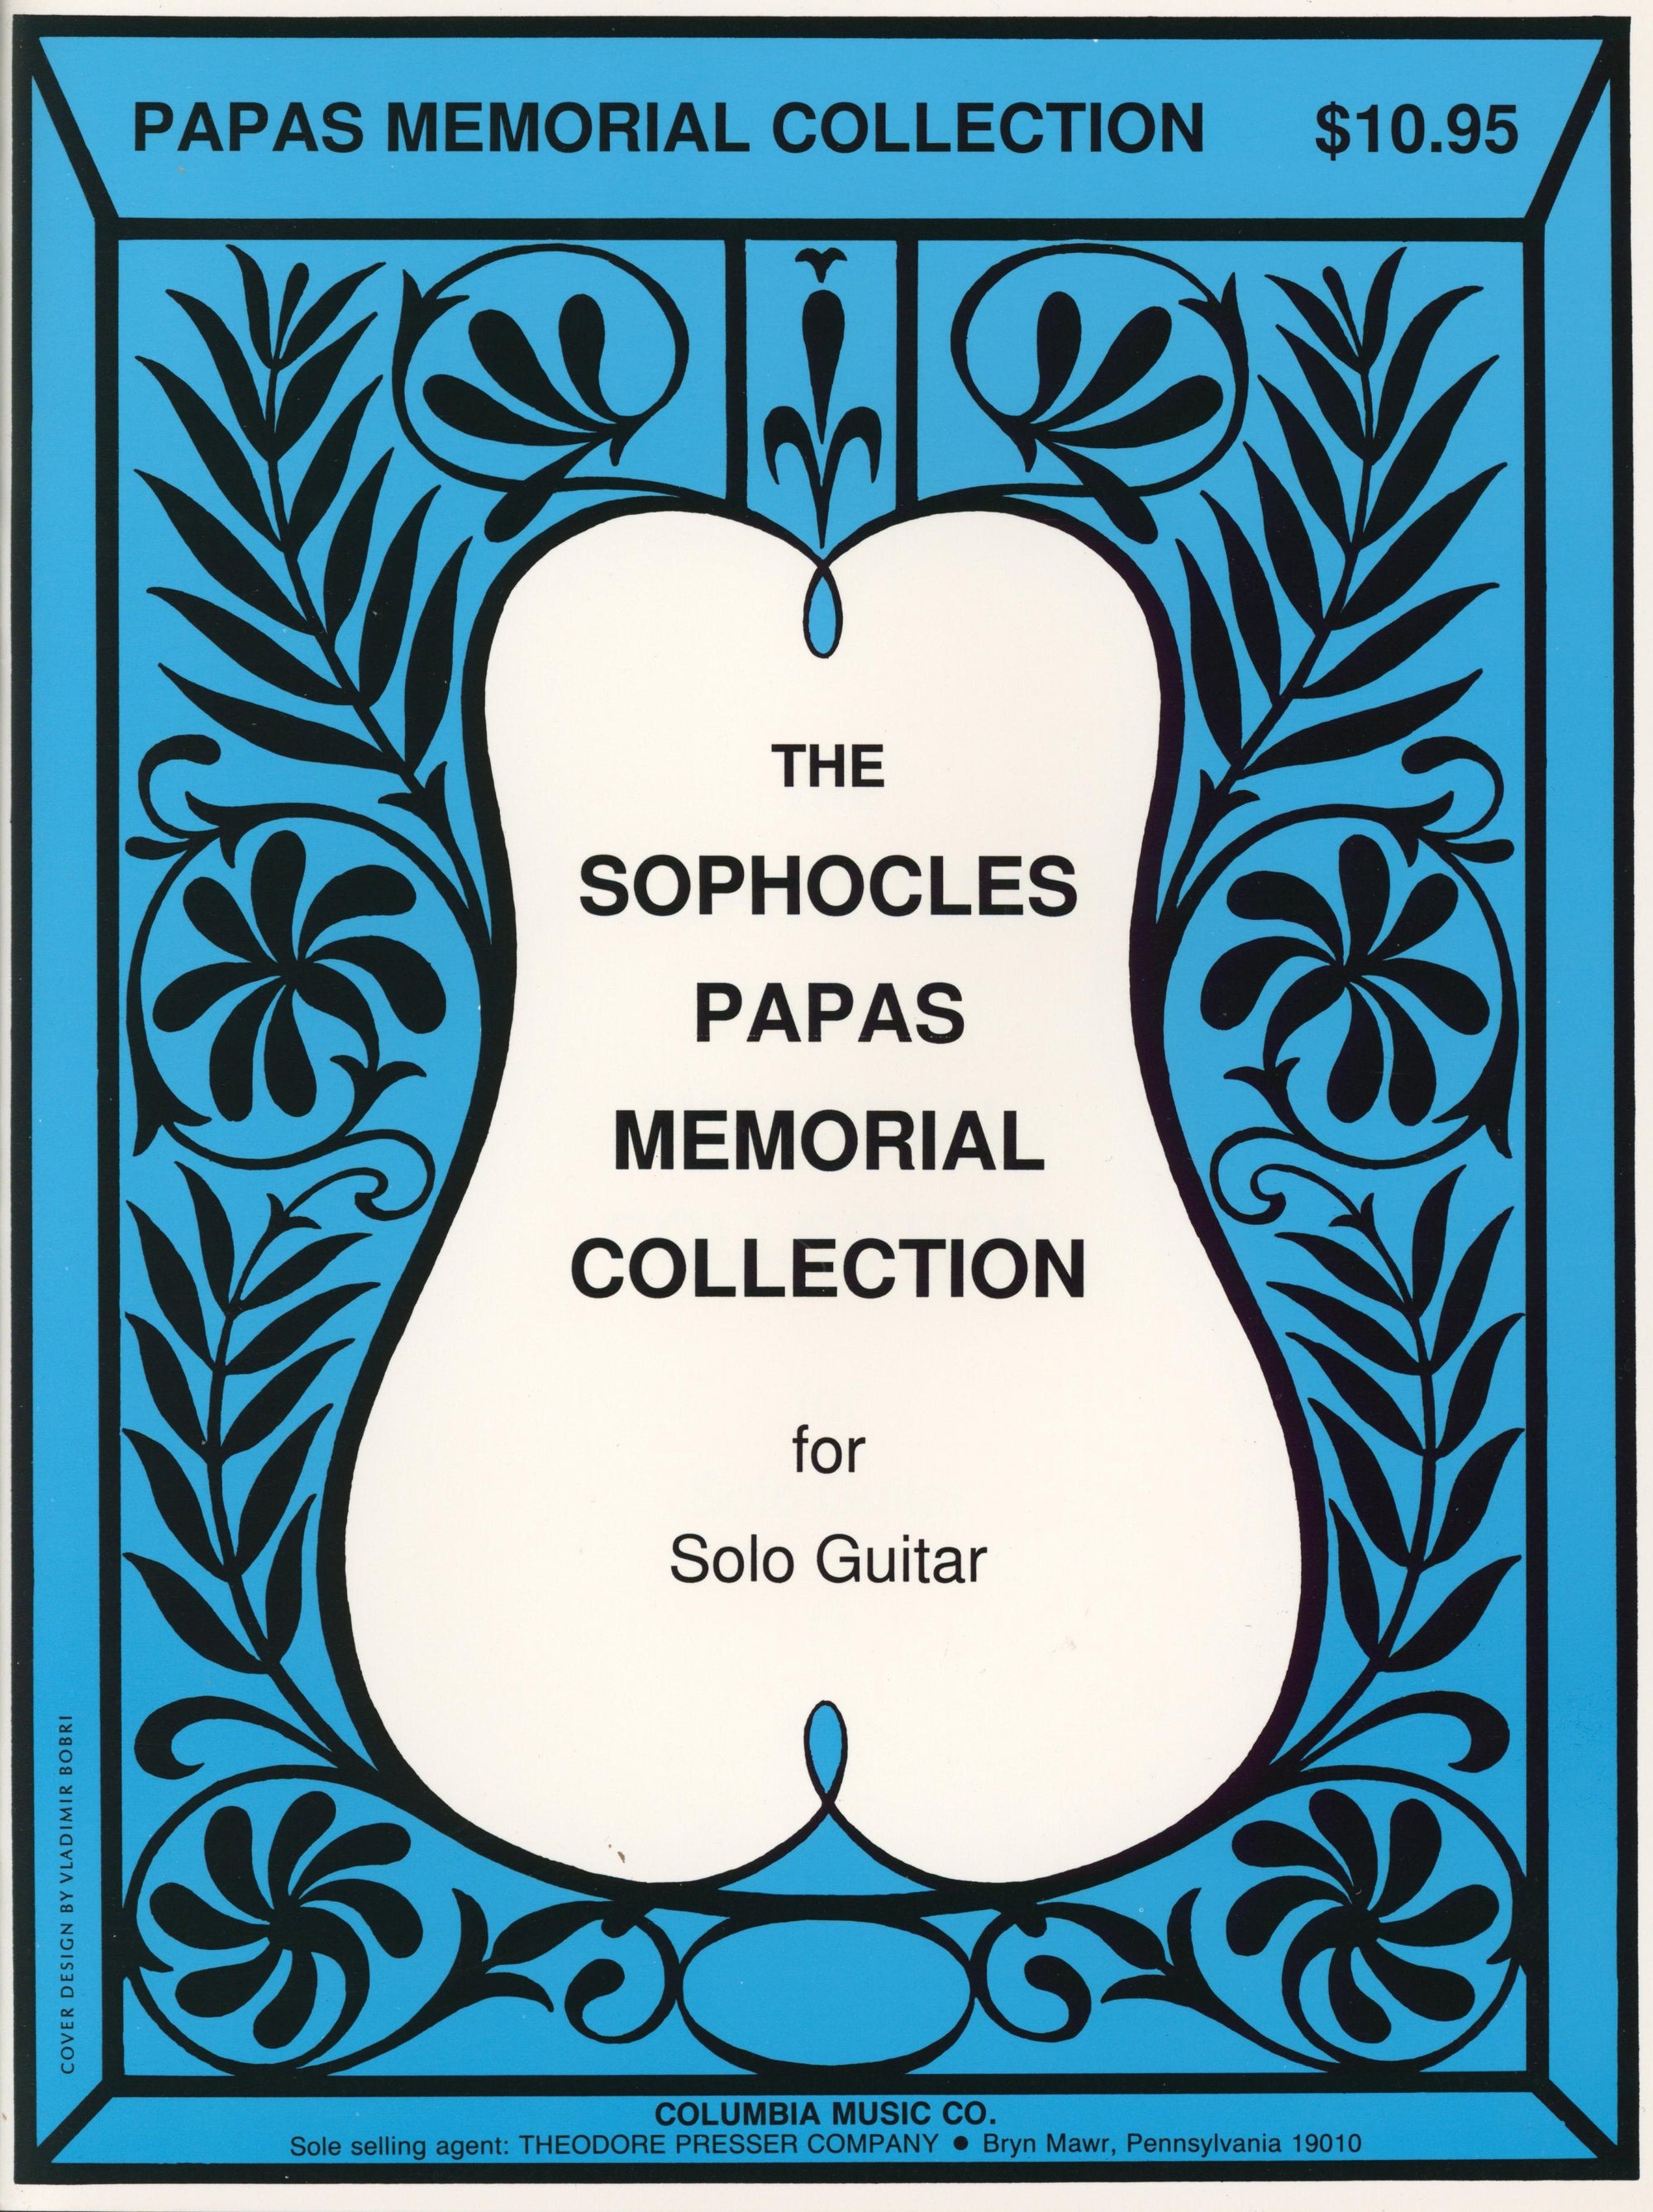 The Sophocles Papas Memorial Collection